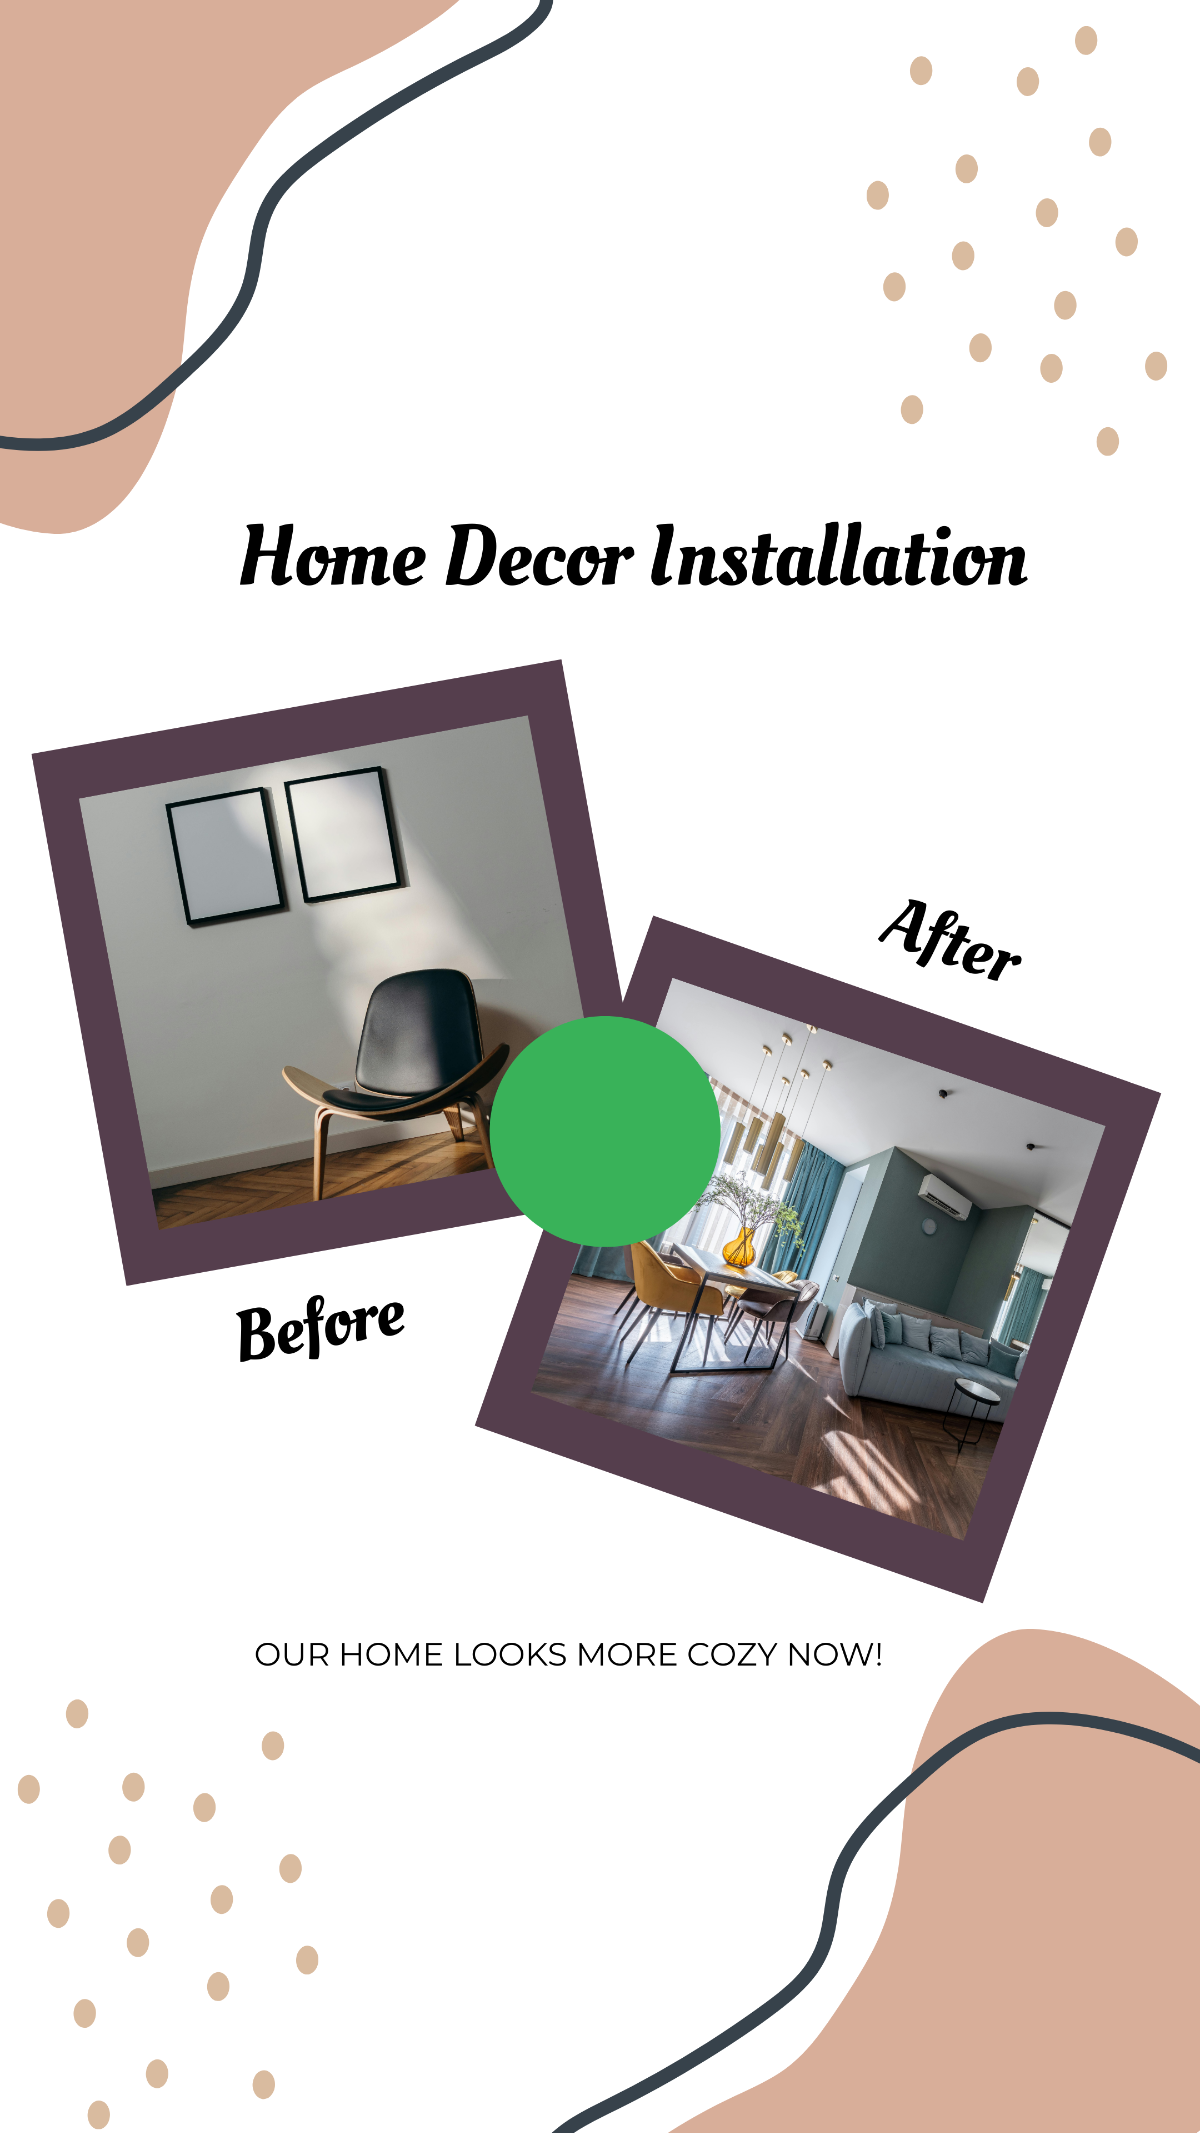 Home Decor Before and After X Post Template